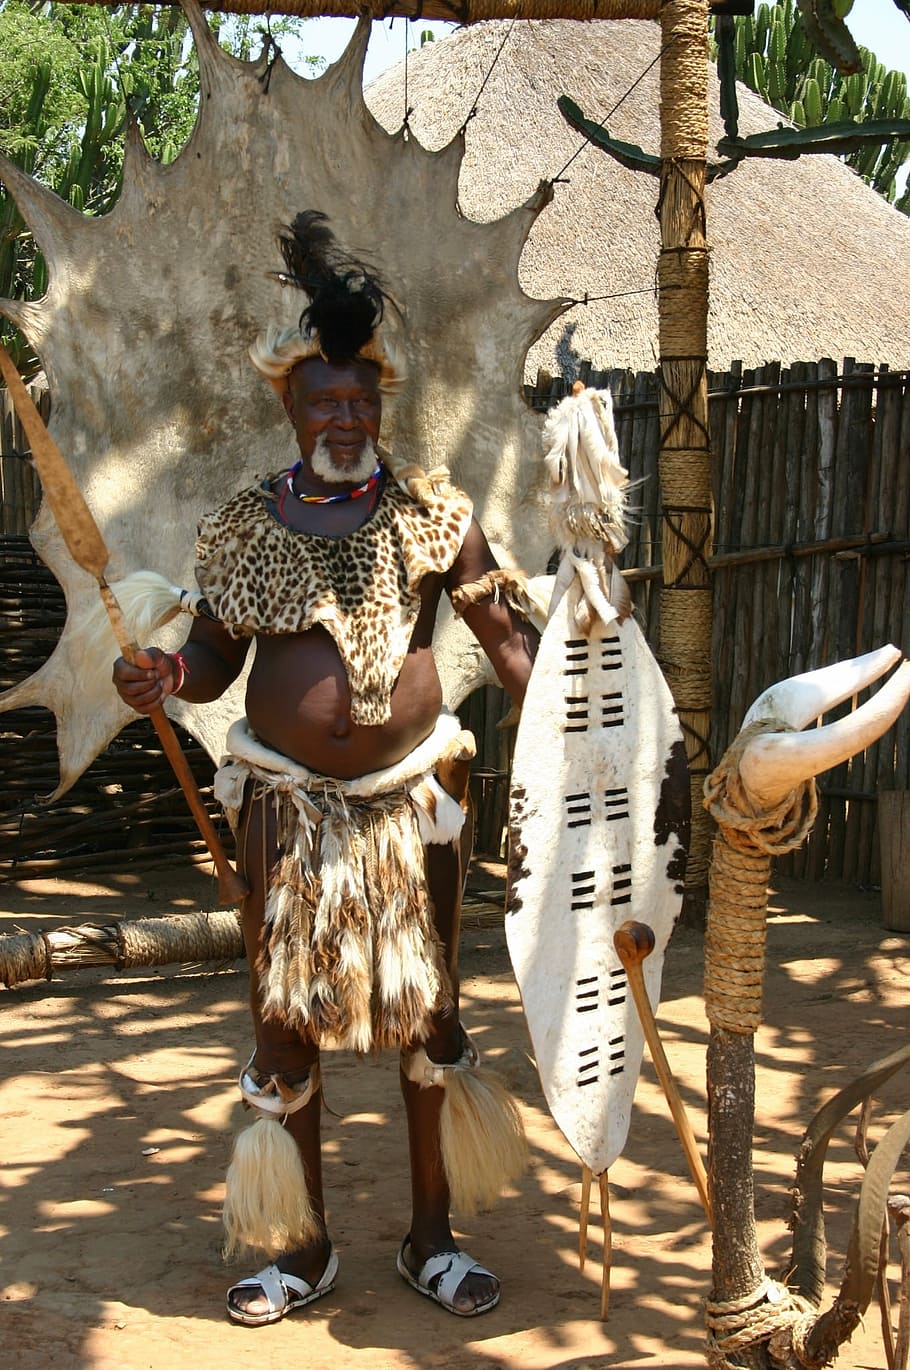 swaziland, warrior, south africa, real people, full length, front view, shadow, sunlight, day, one person